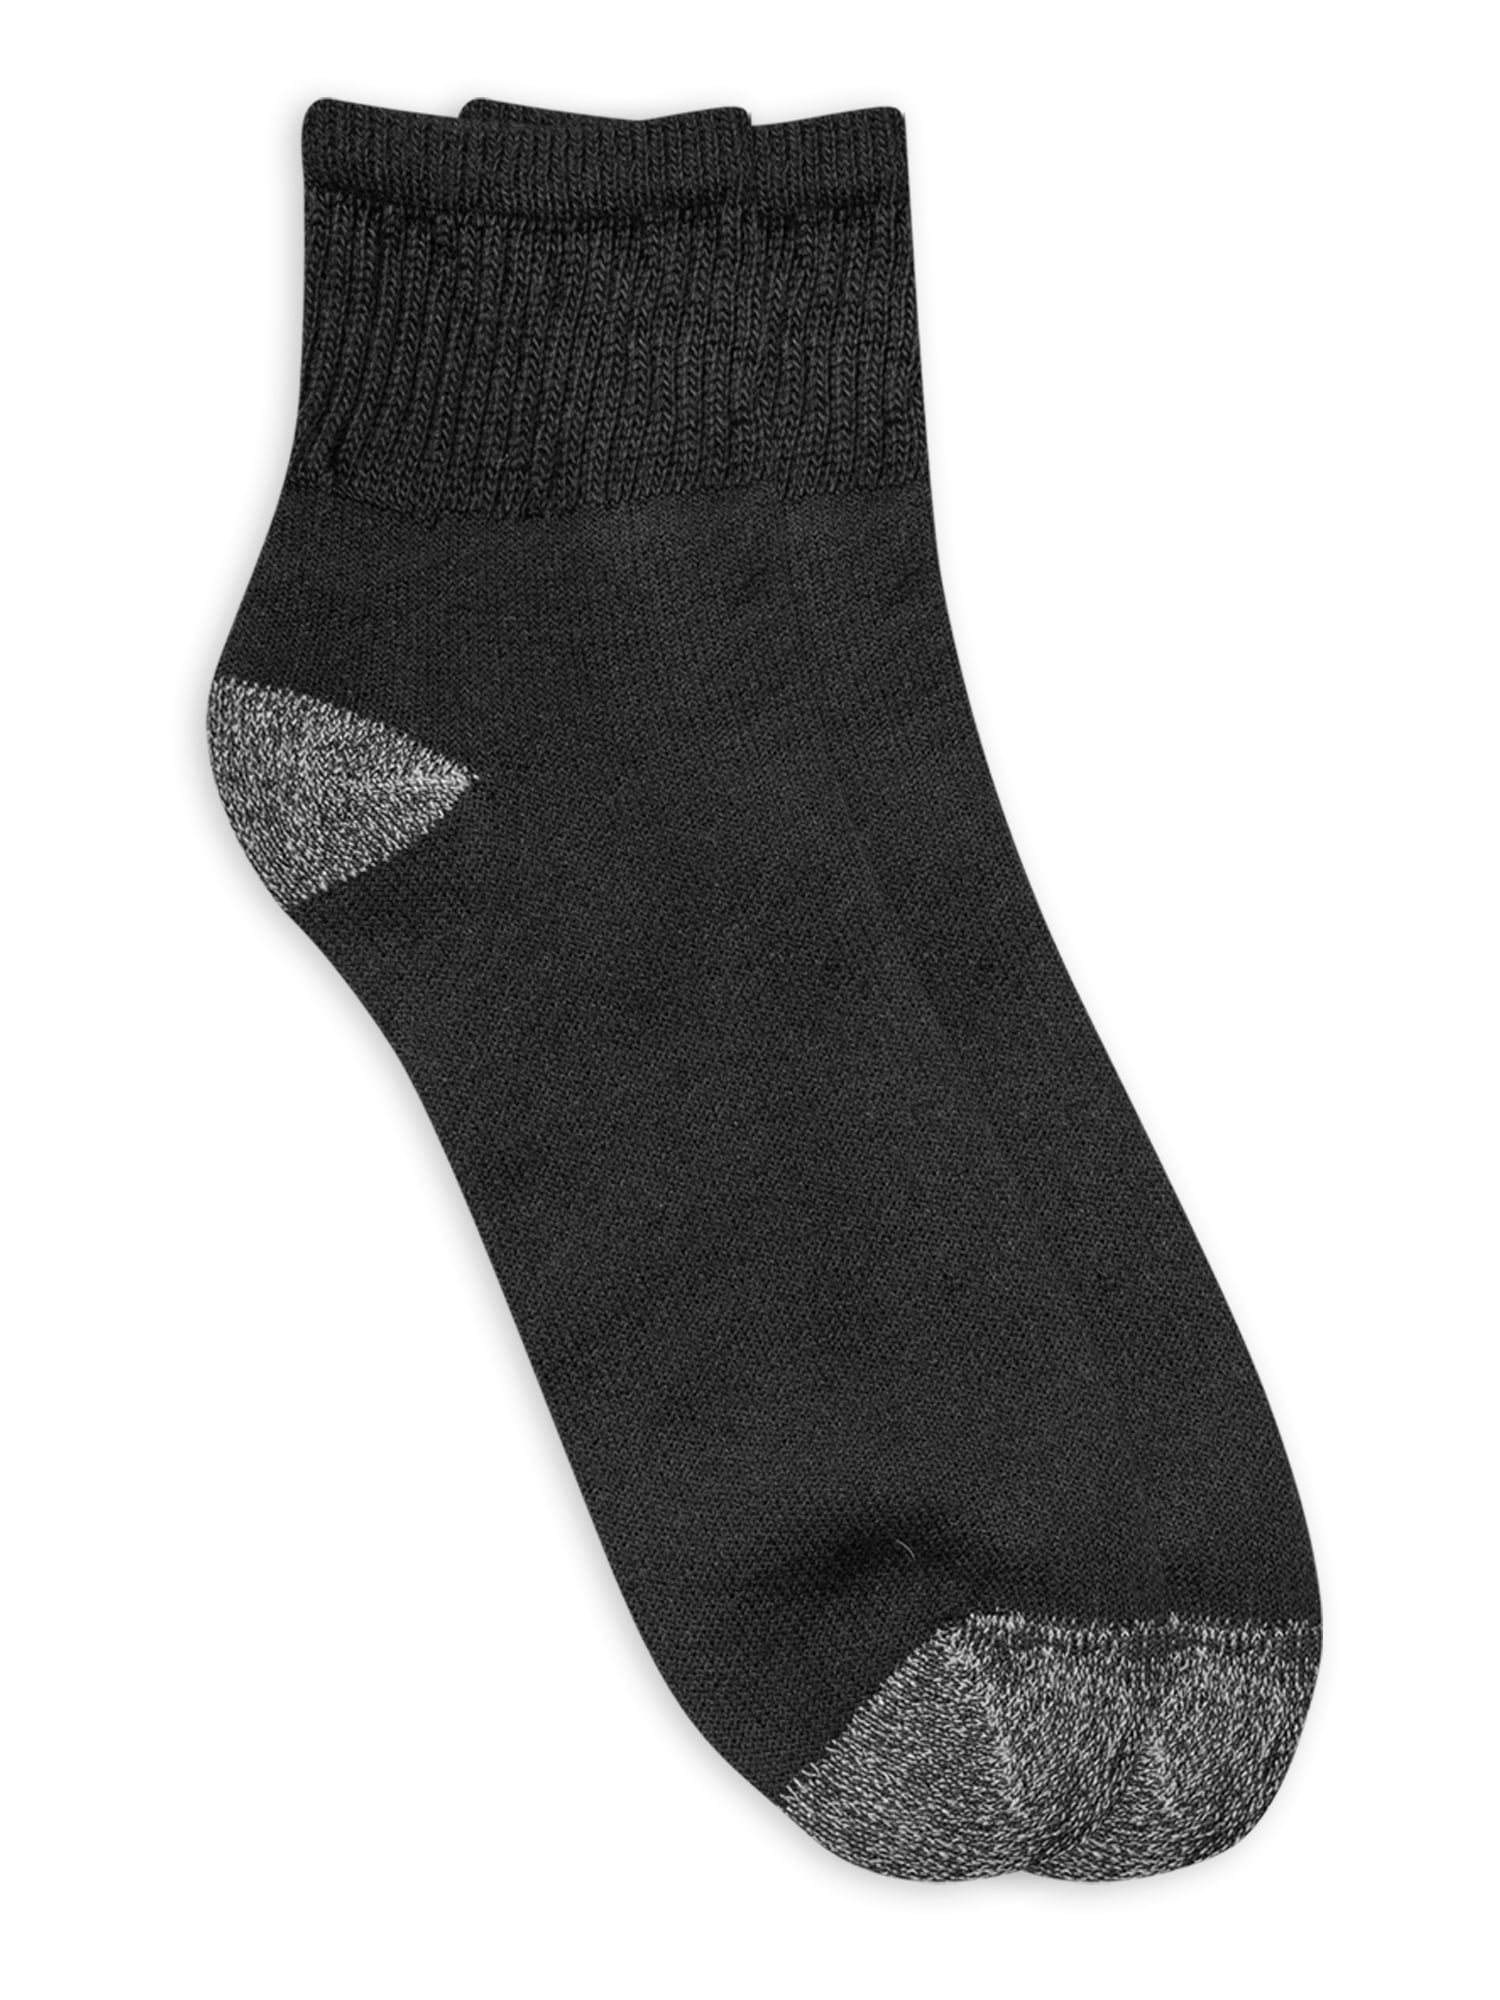 NEW ATHLETIC WORKS MENS ANKLE SOCKS 6 Pairs Soft White 12-15 Big and Tall 